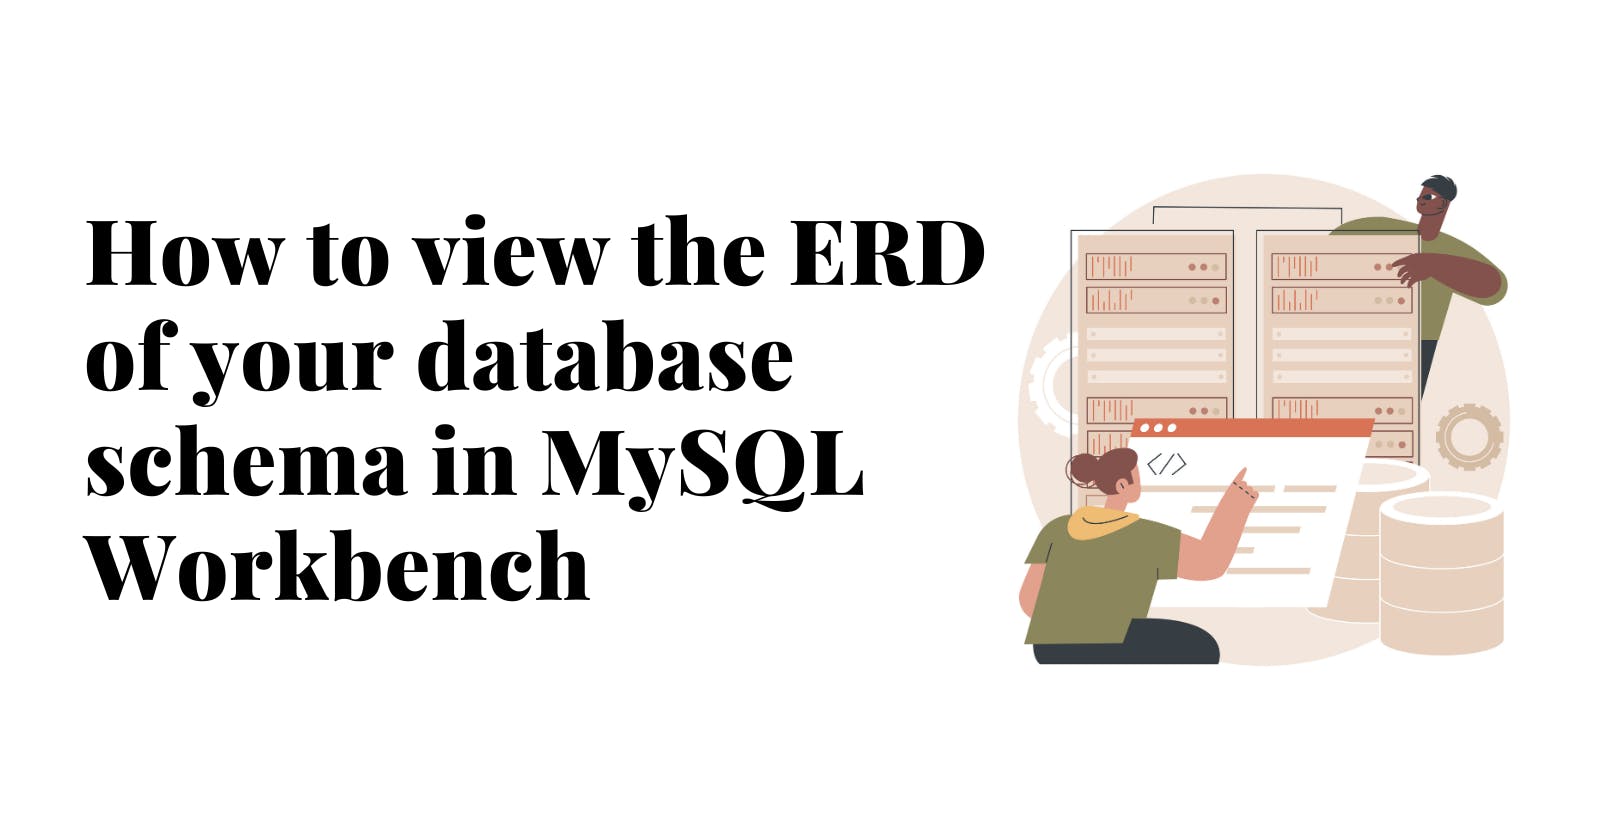 How to access the ERD (Entity-Relationship Diagram) of your database schema in MySQL Workbench